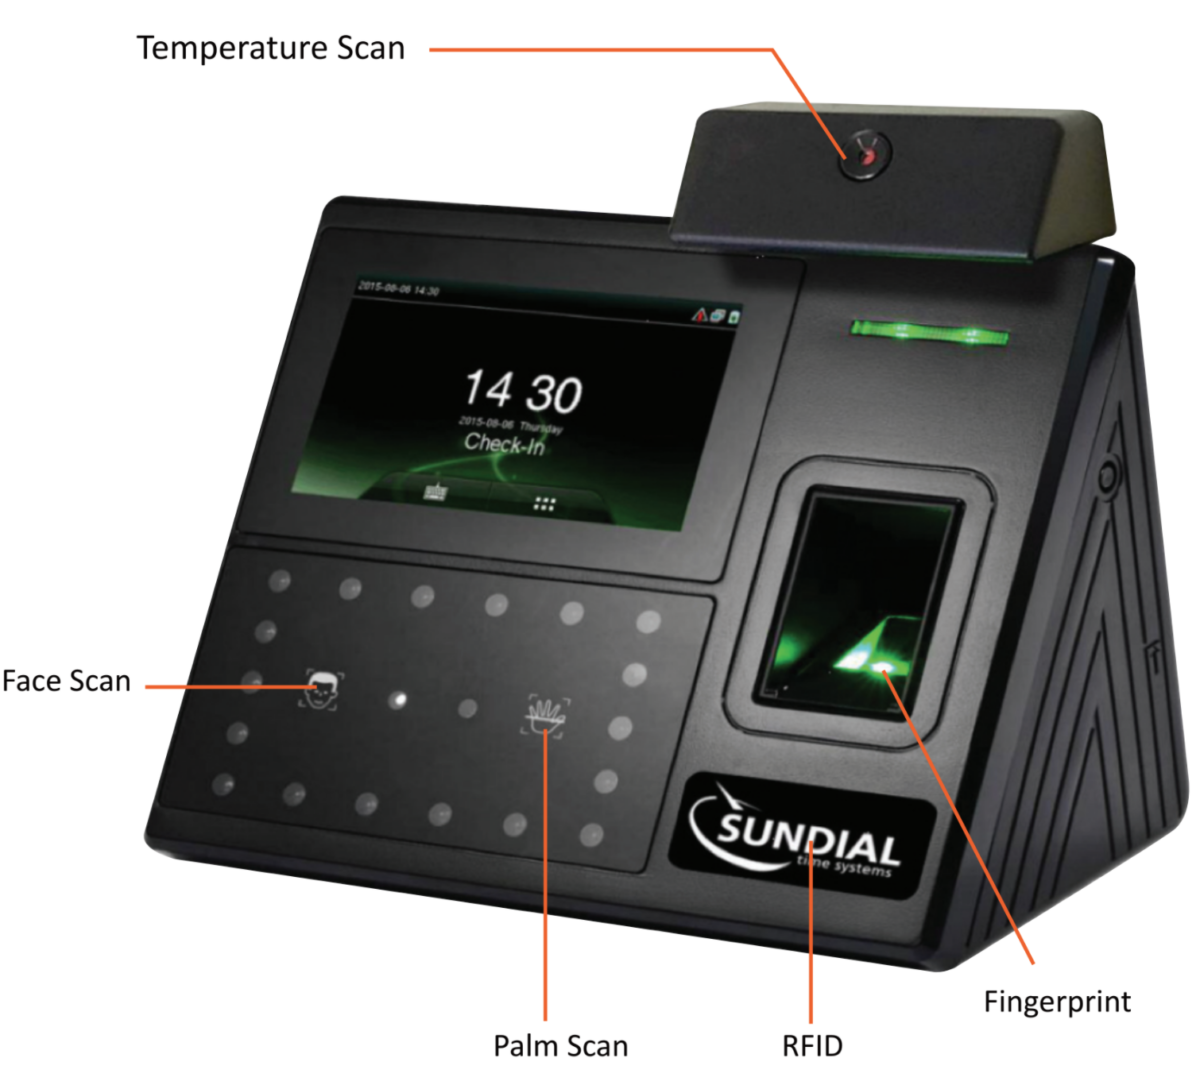 biometric time clock without subscription